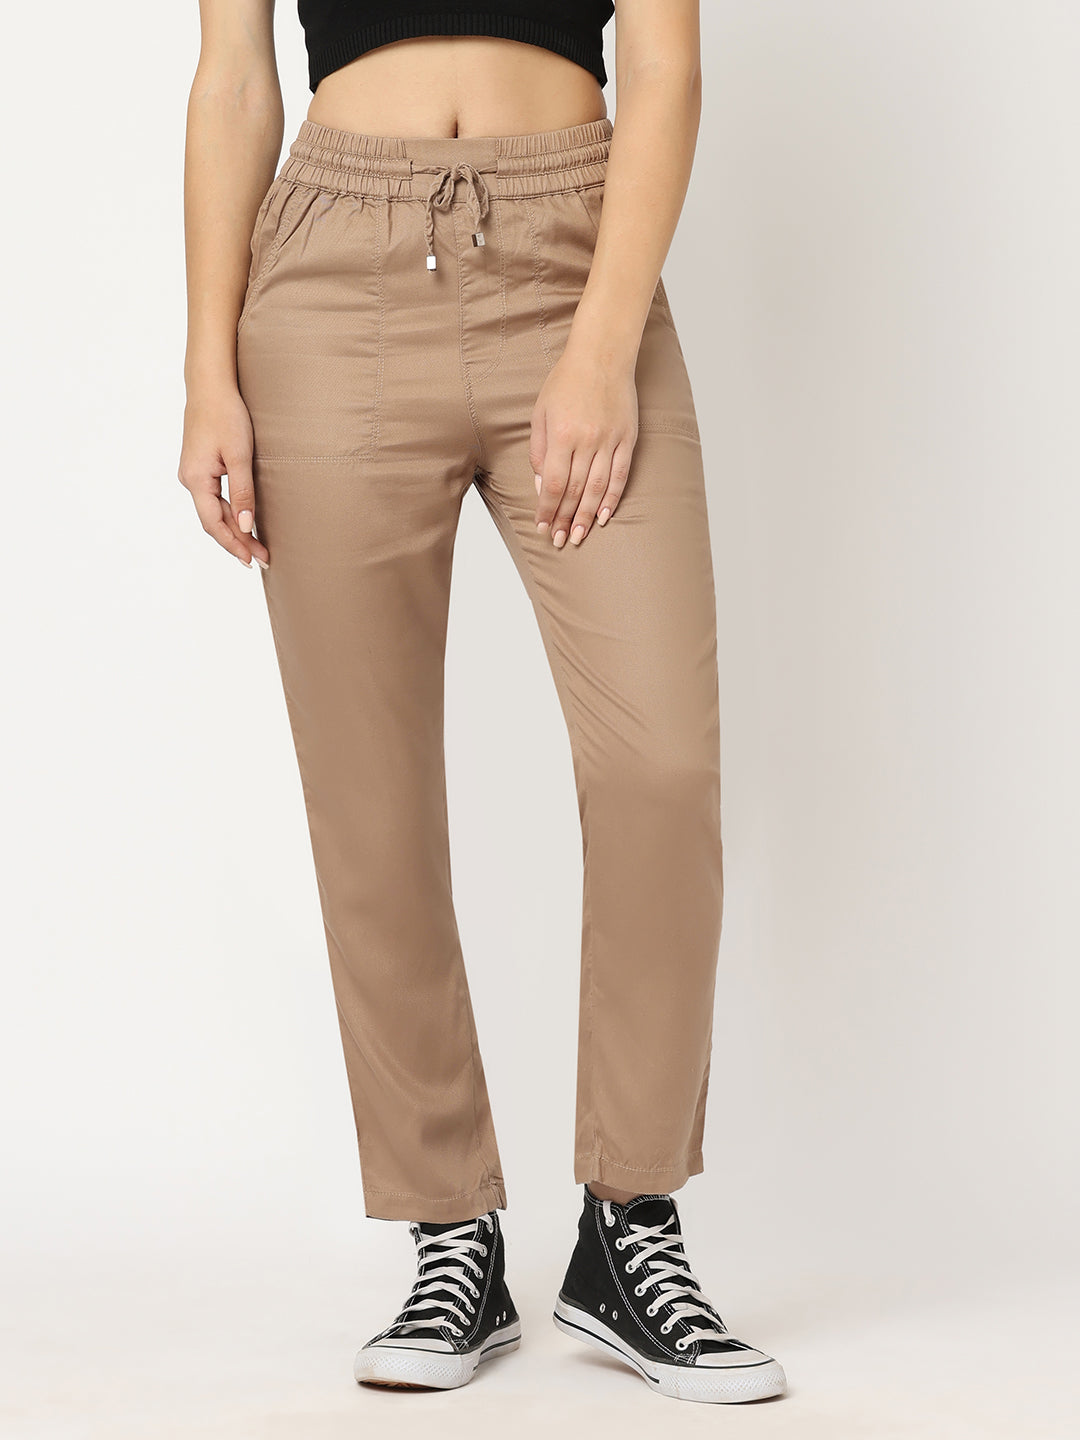 Buy KRAUS Black Solid Viscose Wide Fit Women's Casual Pants | Shoppers Stop